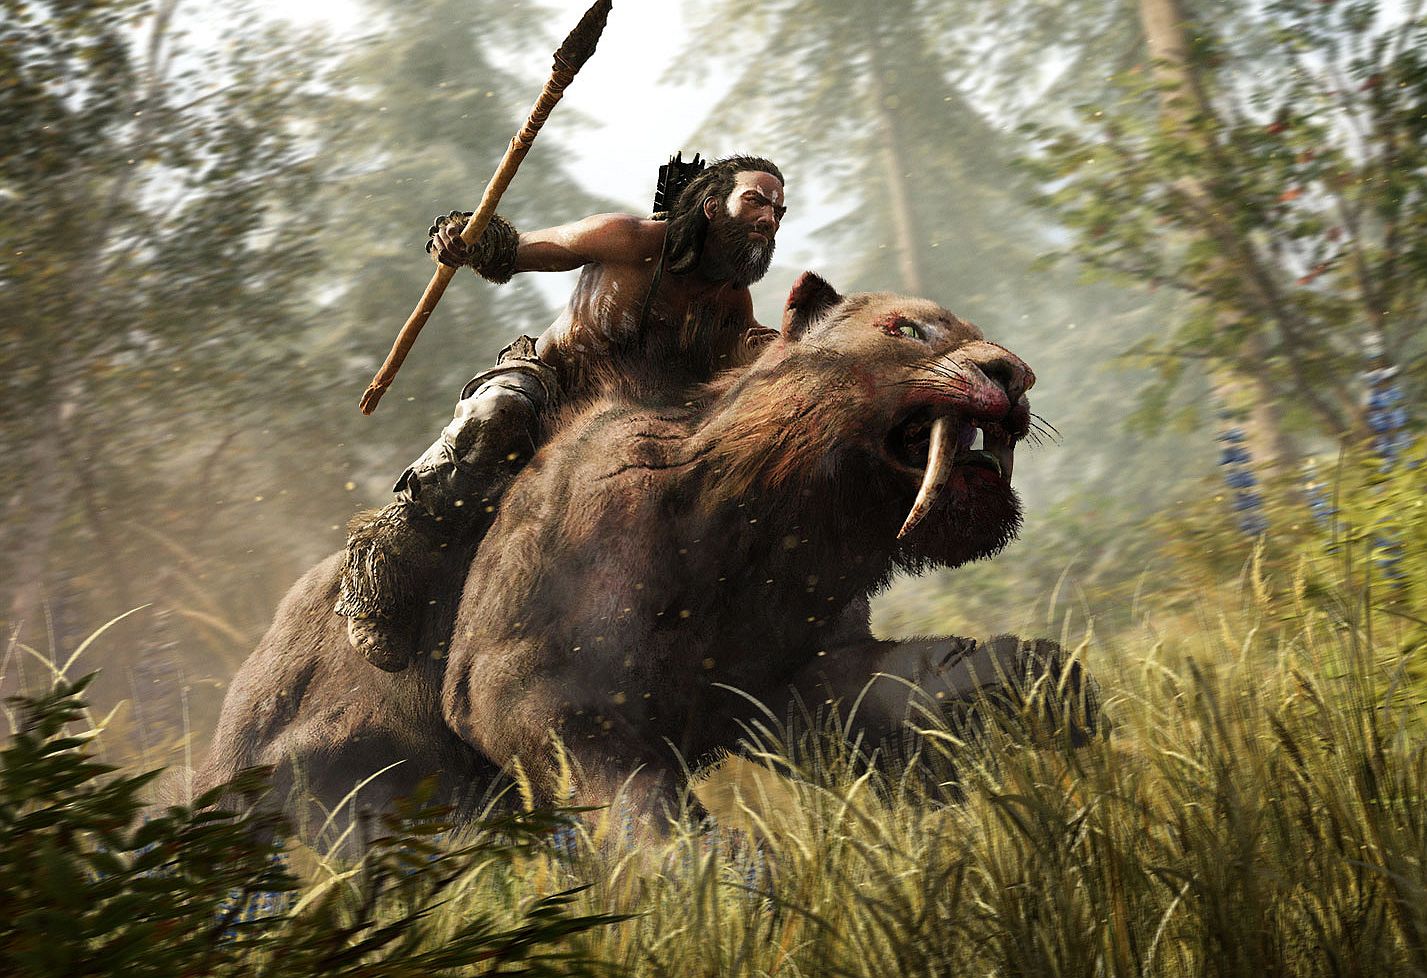 Image for Pre-order Far Cry Primal on Xbox One and get Valiant Hearts free